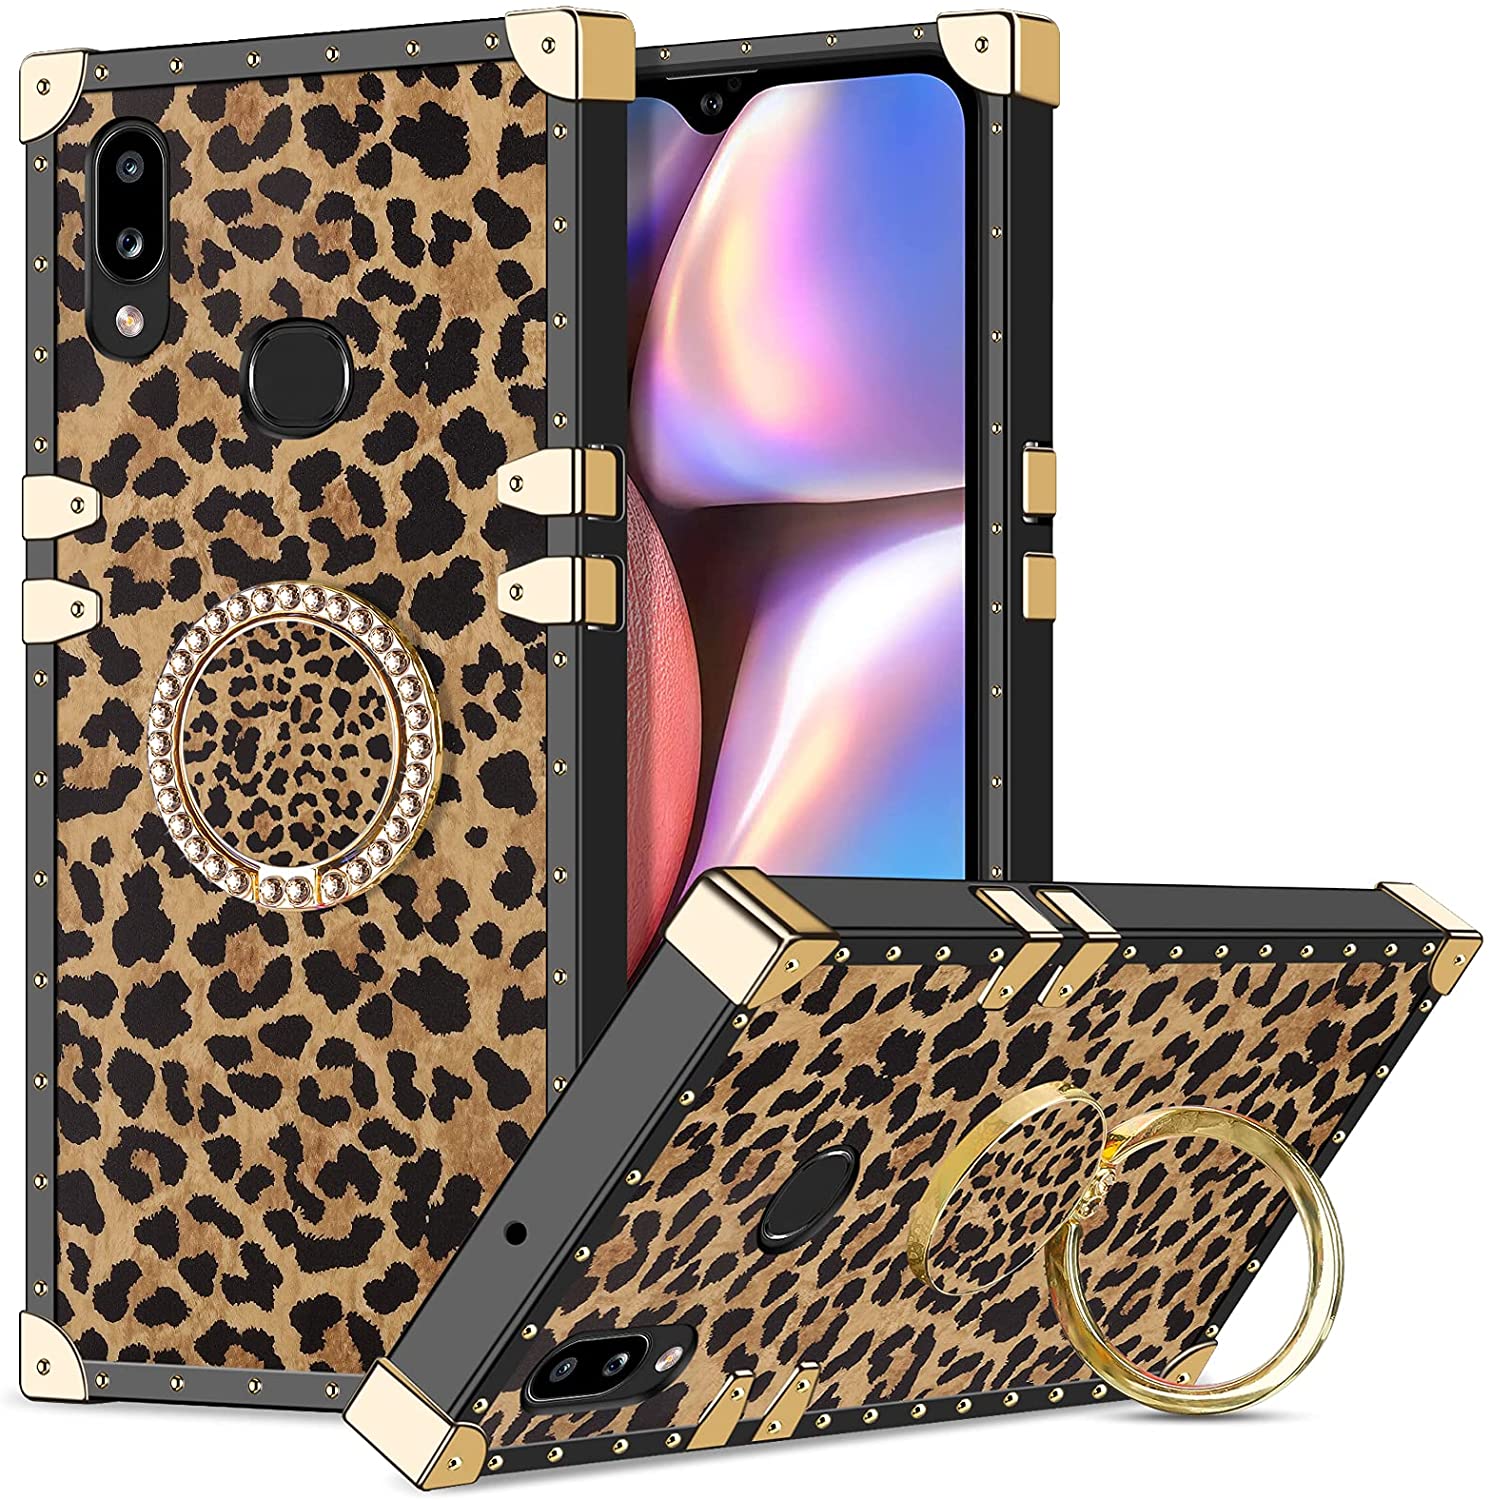 Wollony Galaxy A10S Case with Diamond Kickstand Ring Stand Luxury Design Square Case for Women Soft TPU Shell Metal Decoration Corner Shockproof Protective Cover Leopard